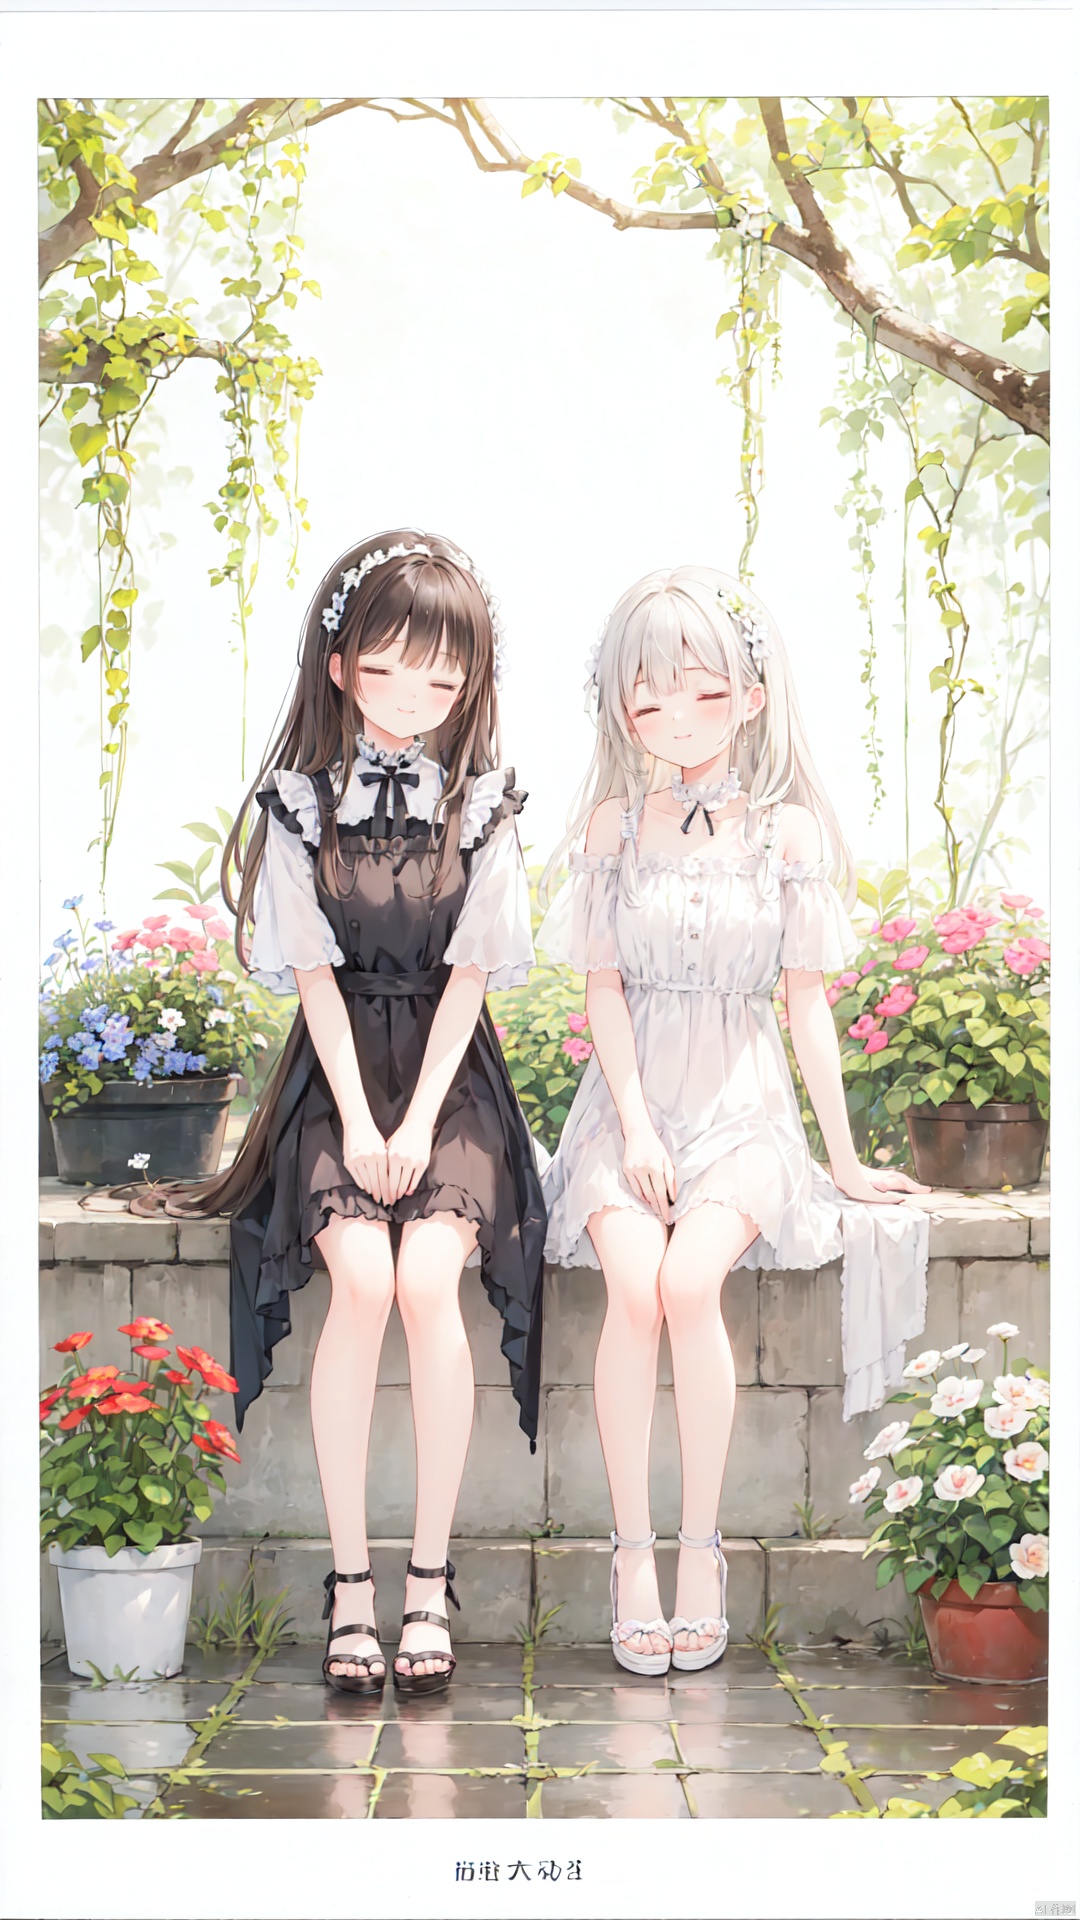 lovely smile,(background with border:1.2),[((floral ornaments,flower stand,Water)Background:1.2)::10], longan,closed eyes,long hair,(2girls:1.2),(multiple girls:1.2),blush,bangs,white background,pale color,knees up,closed mouth,no nose,facing viewer,legs together,(Garden:1.1),Close,